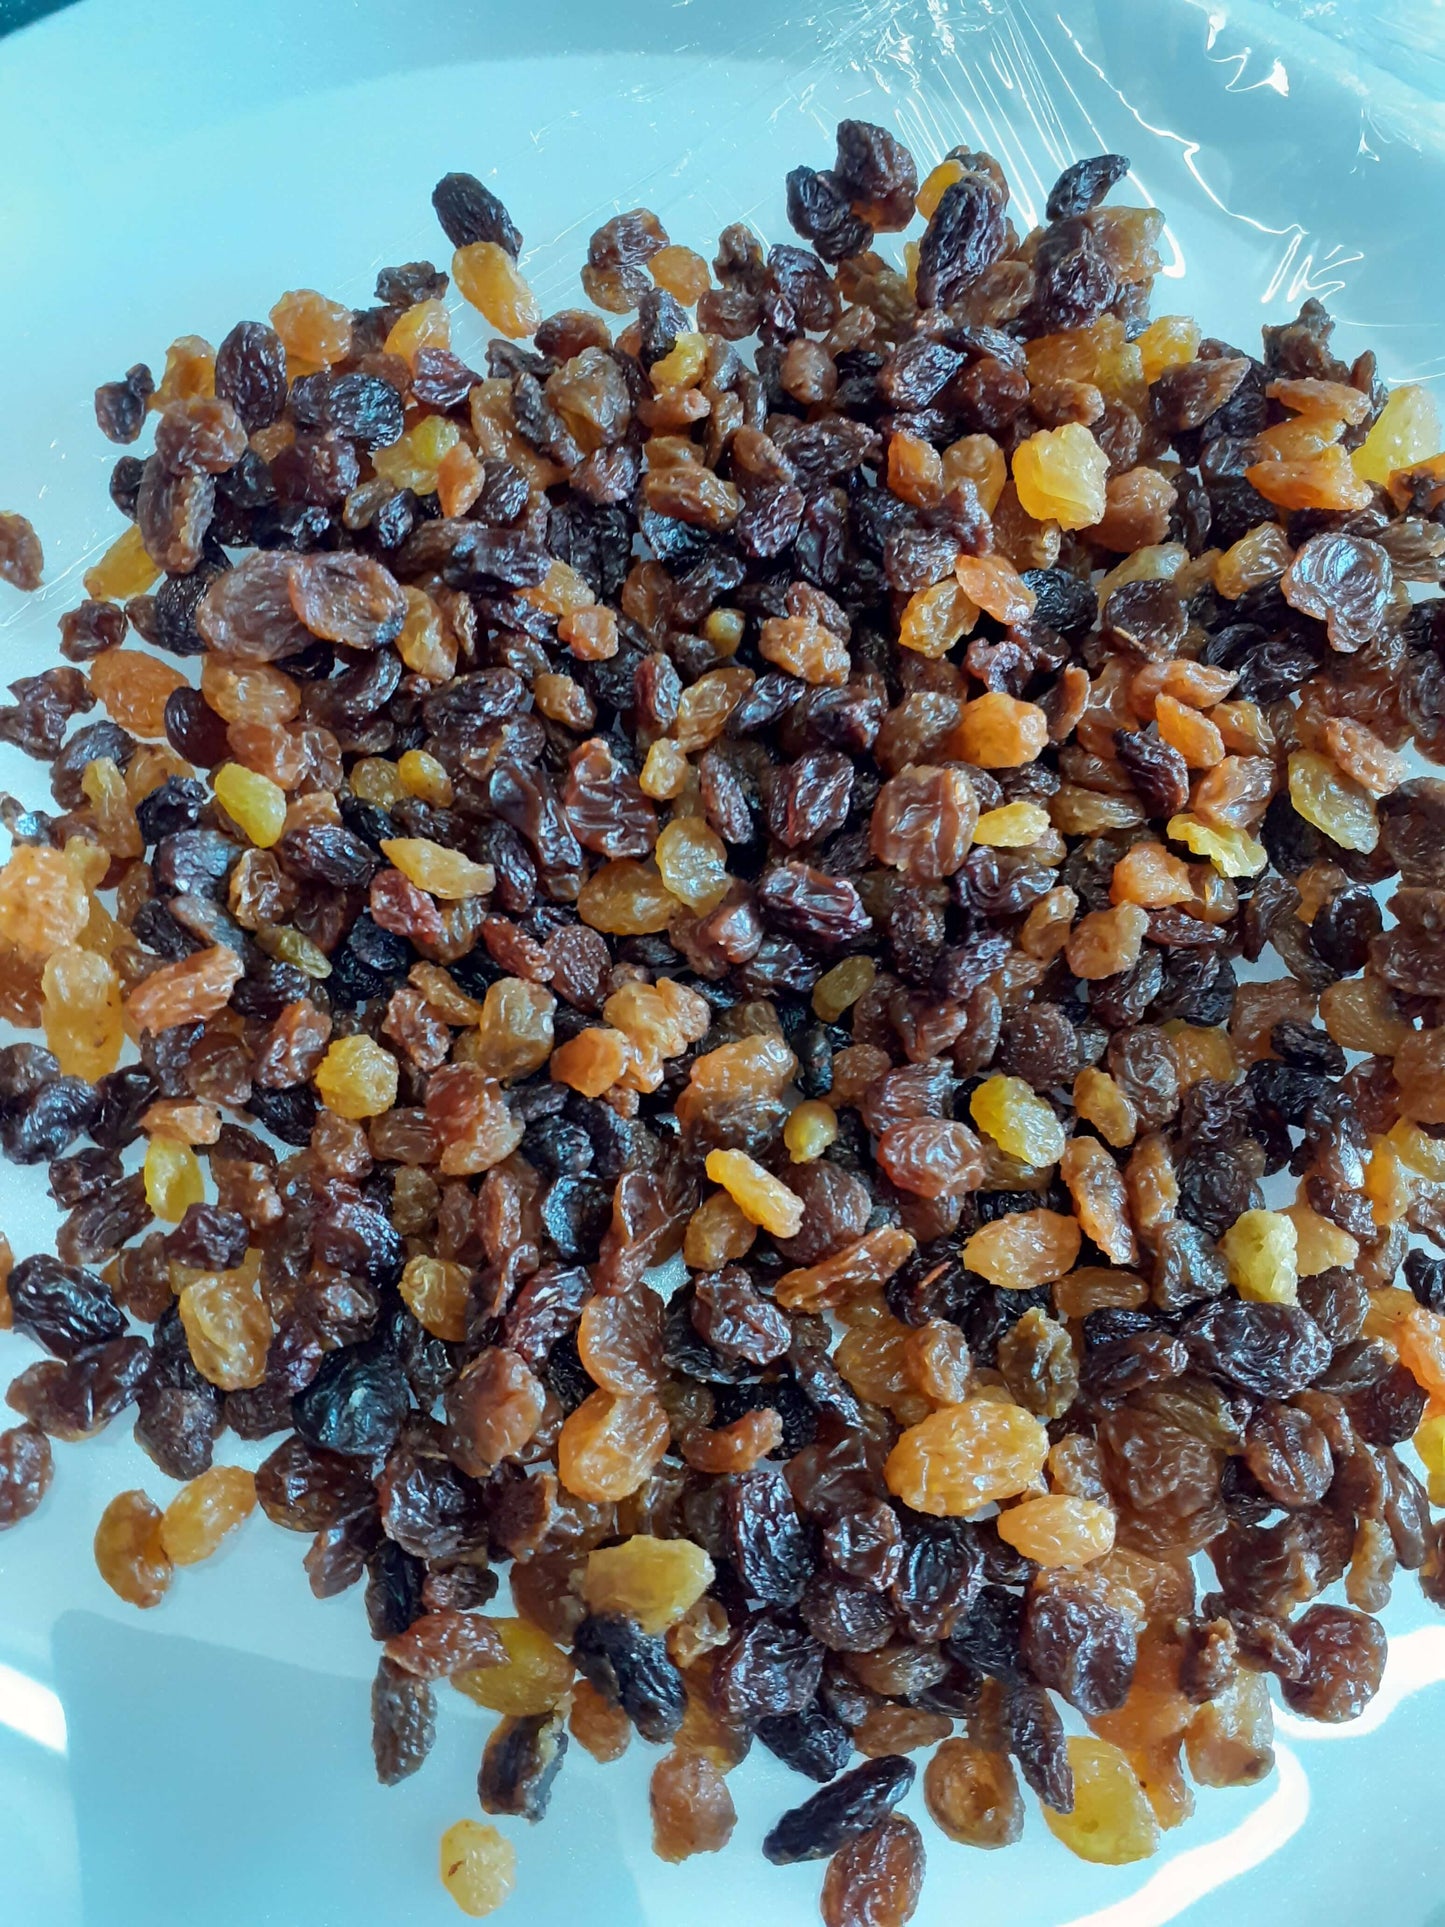 Bakers Econo Mix (seedless raisins and golden sultanas)